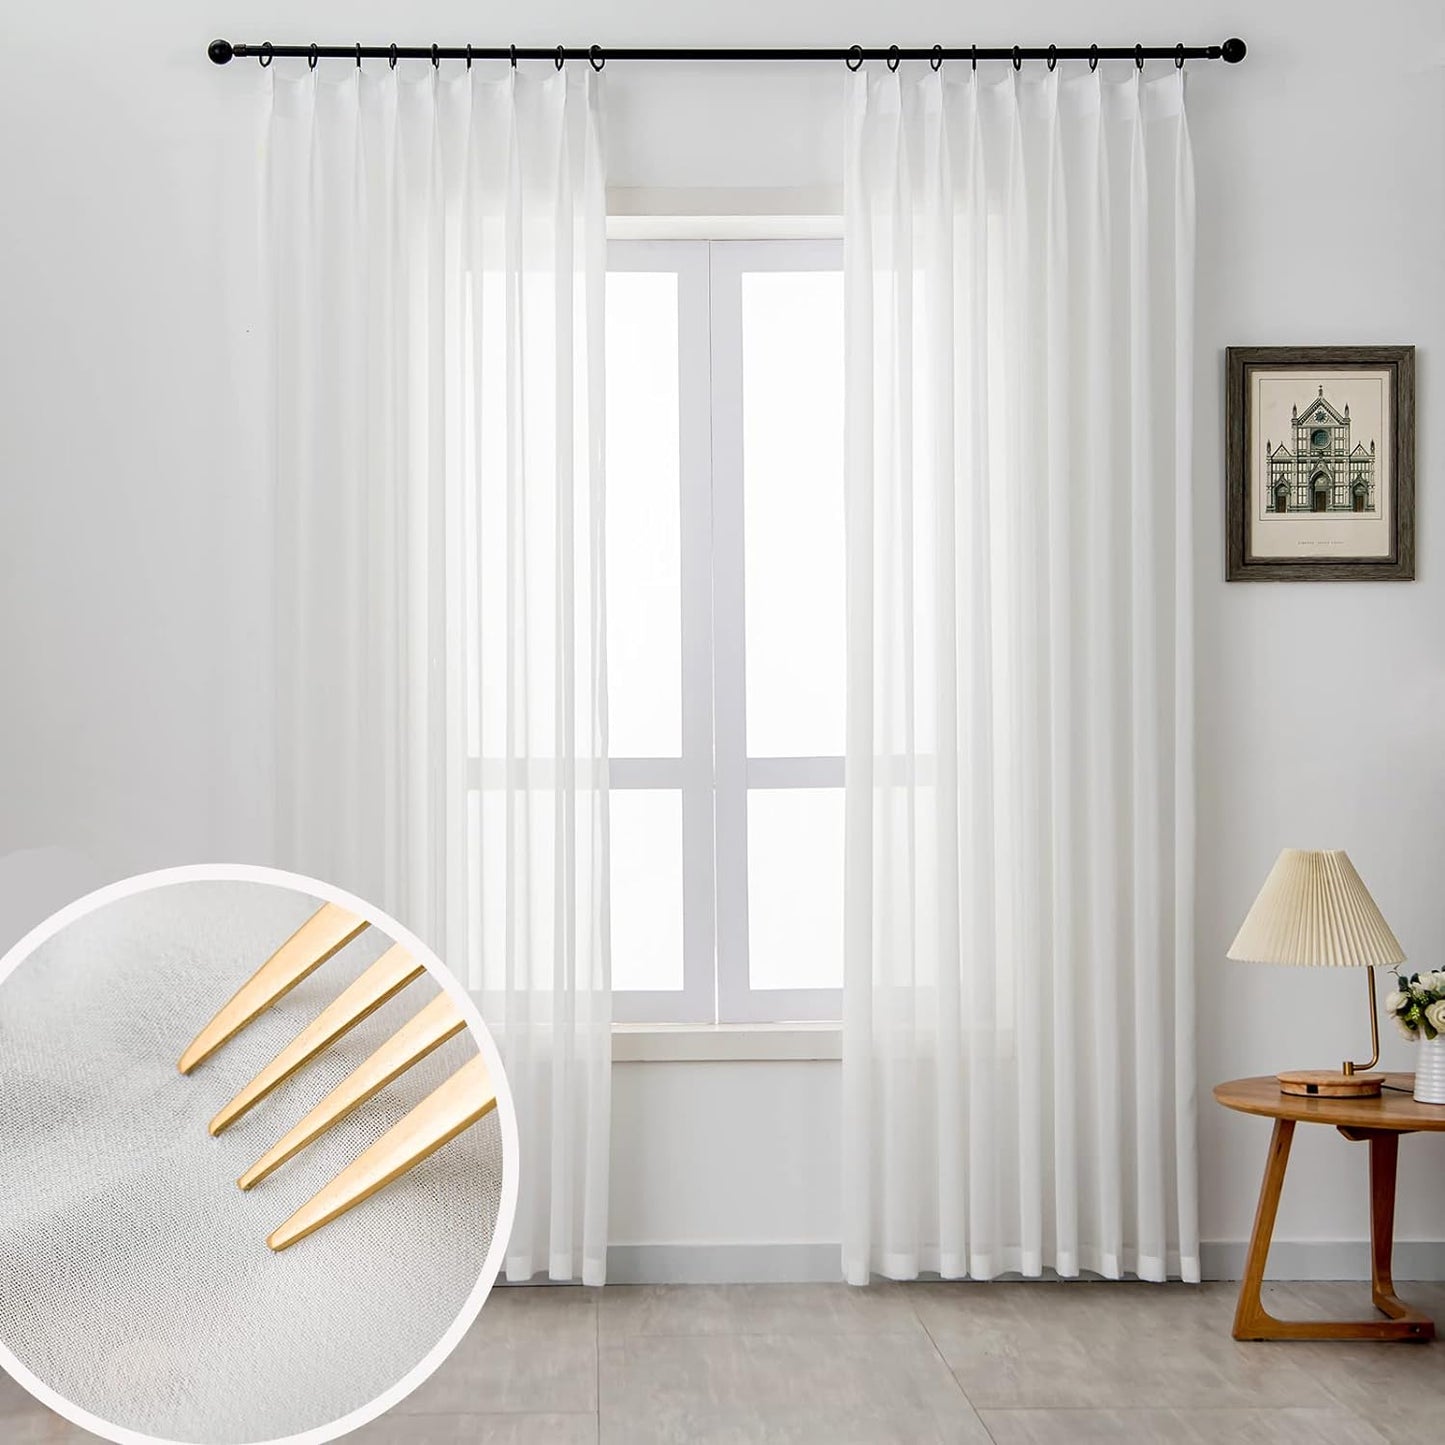 LUGOTAL Pinch Pleated Drapes 108 Inches Long 1 Panel off White Chiffon Sheer Curtains for Living Room and Bedroom Semi-Sheer Light Filtering Curtains & Drapes for Sliding Glass Door, W52 X L108  LUGOTAL Off White (W52" X L96")*1 Panel 